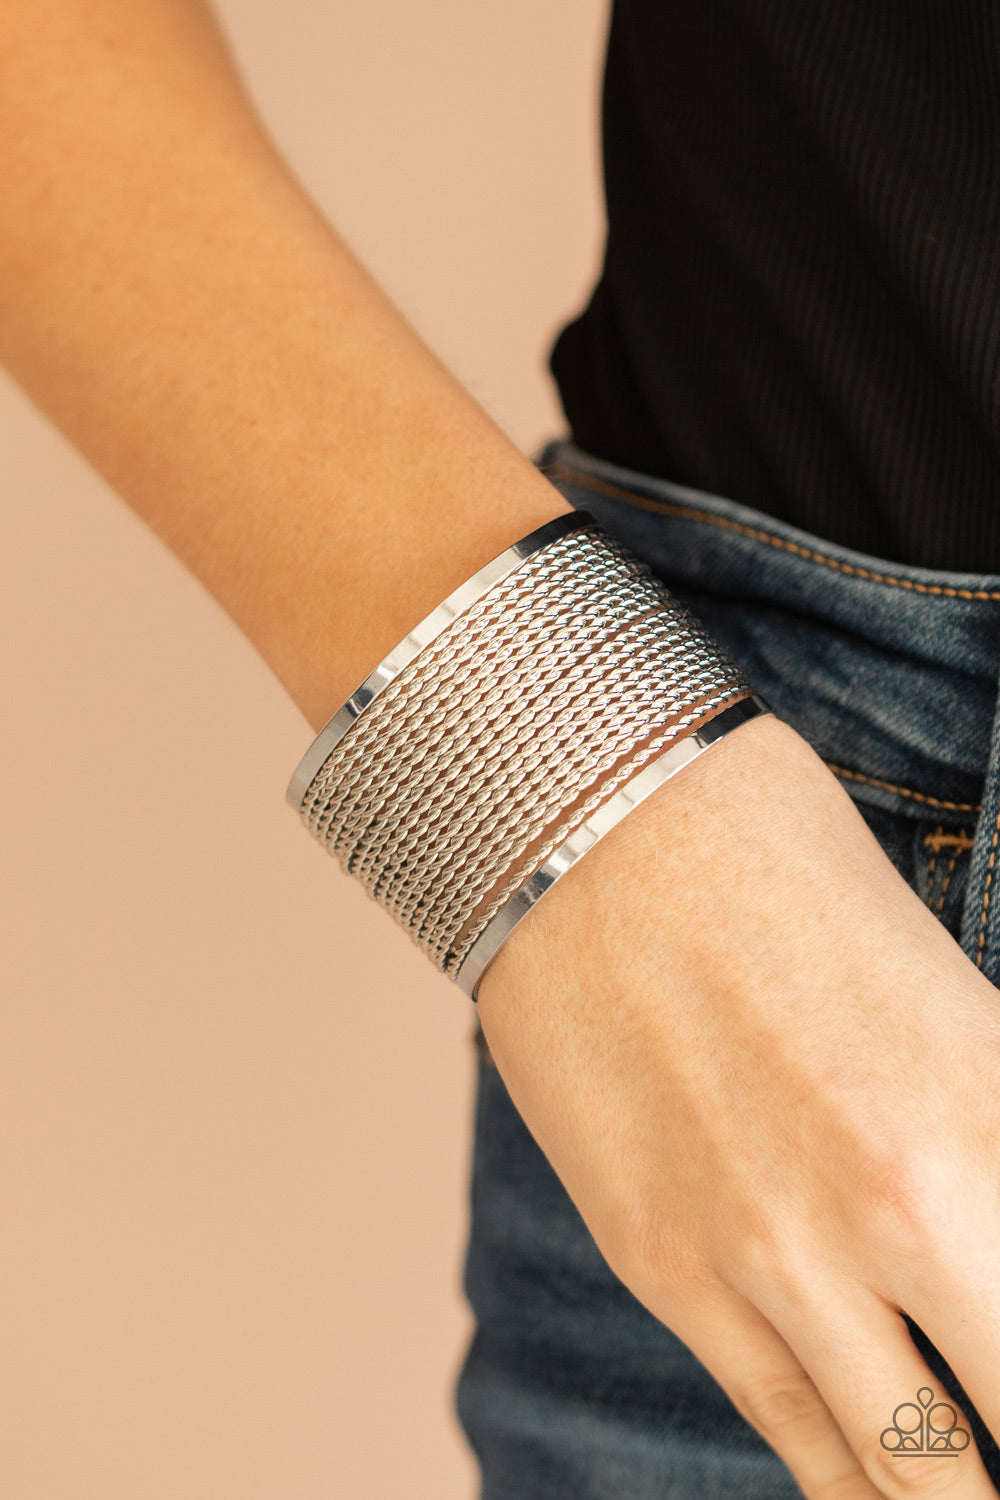 Twisted rows of silver wire layer between two flat silver bars, coalescing into a boldly stacked cuff around the wrist.